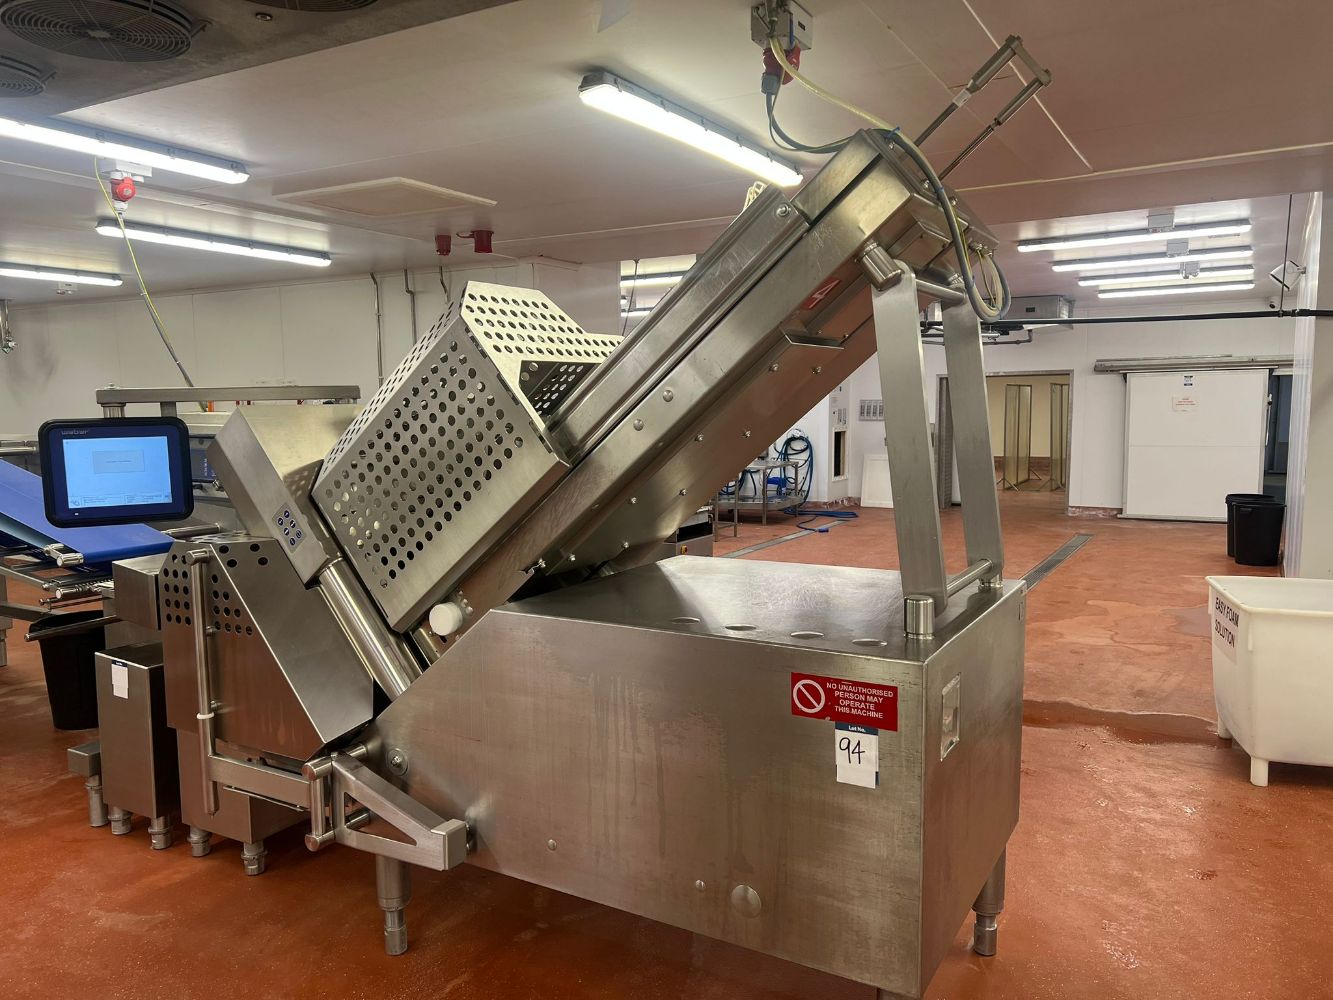 SALE OF LARGE MEAT PROCESSING & PACKING FACTORY - EVERYTHING MUST SELL!